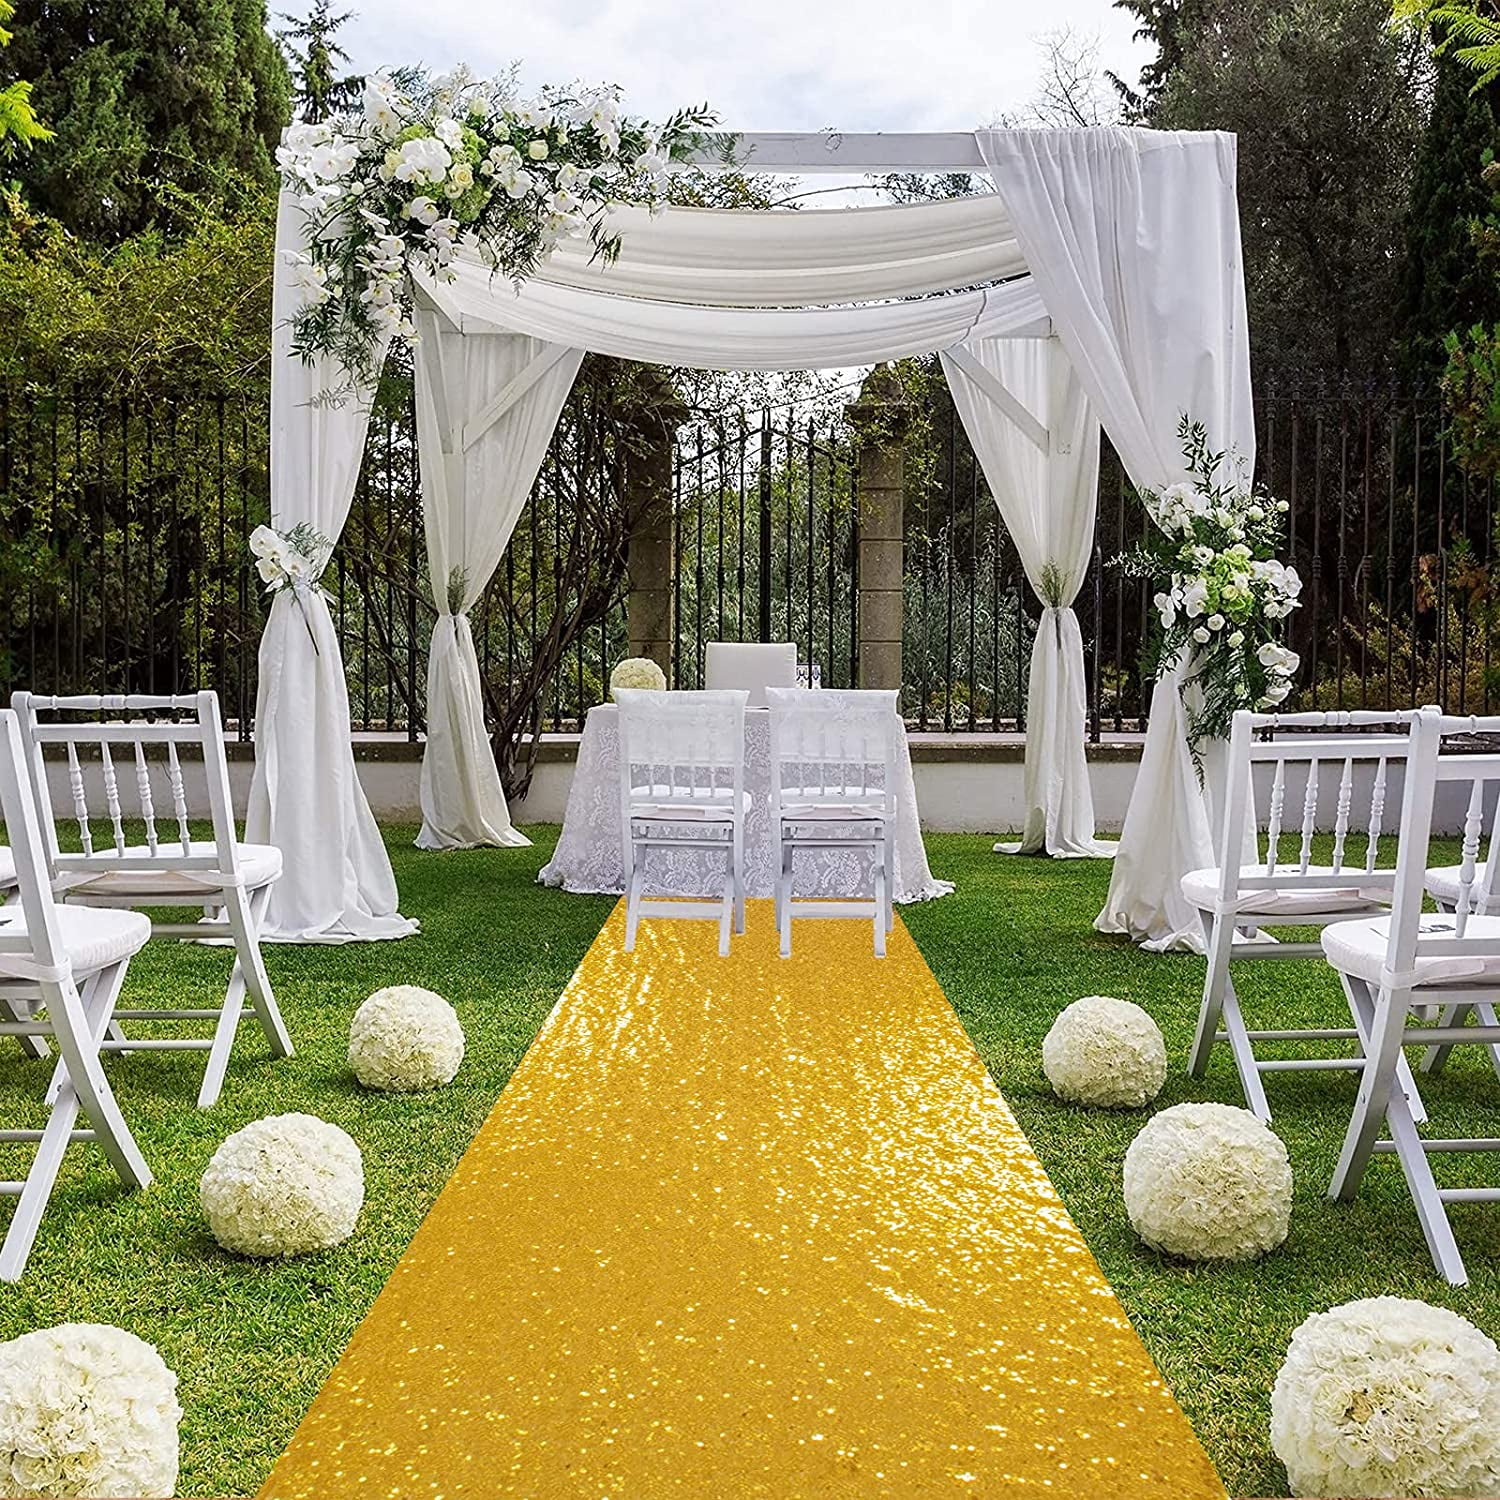 Wedding Aisle Runner White Golden 50 x 3 ft Ceremony And Party Rug Pull String 